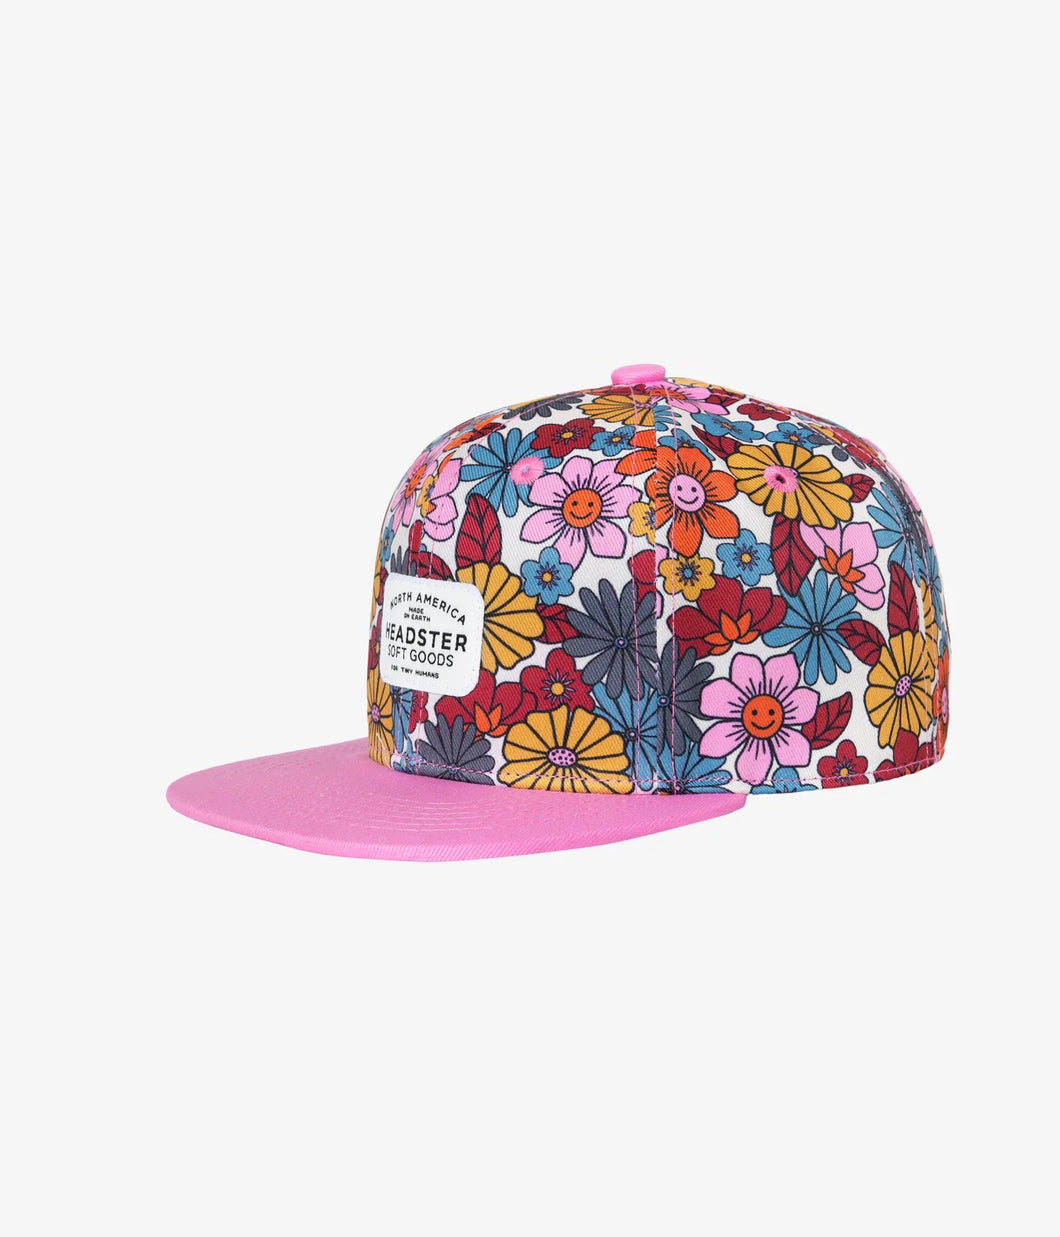 Headster Sally-Be-Gone-Pink Snapback